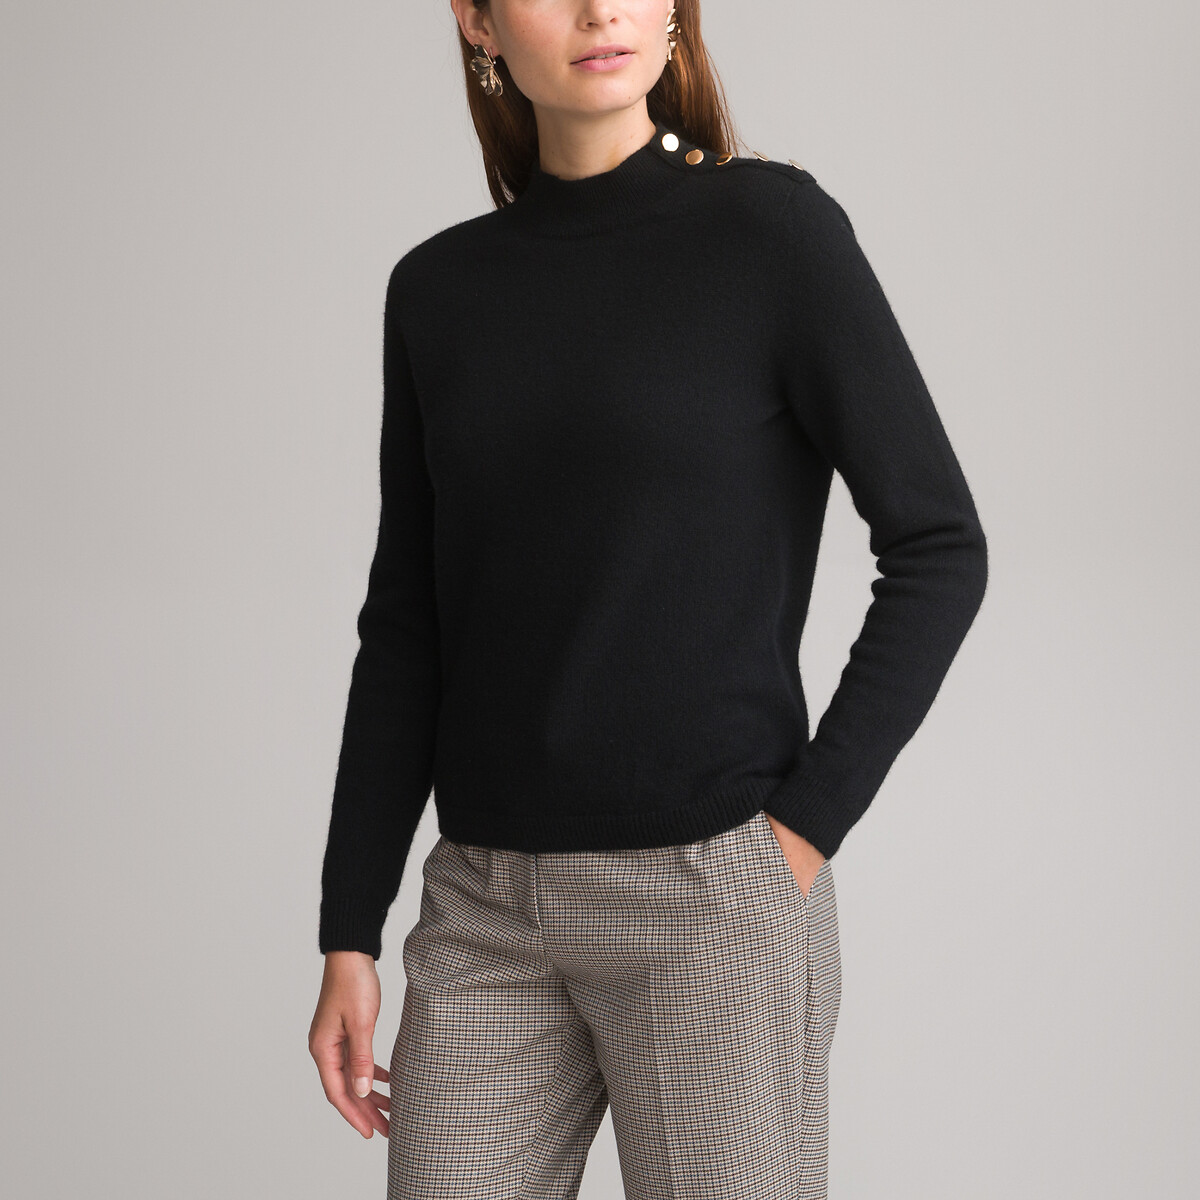 Wool/Cashmere Jumper in Fine Knit with High Neck